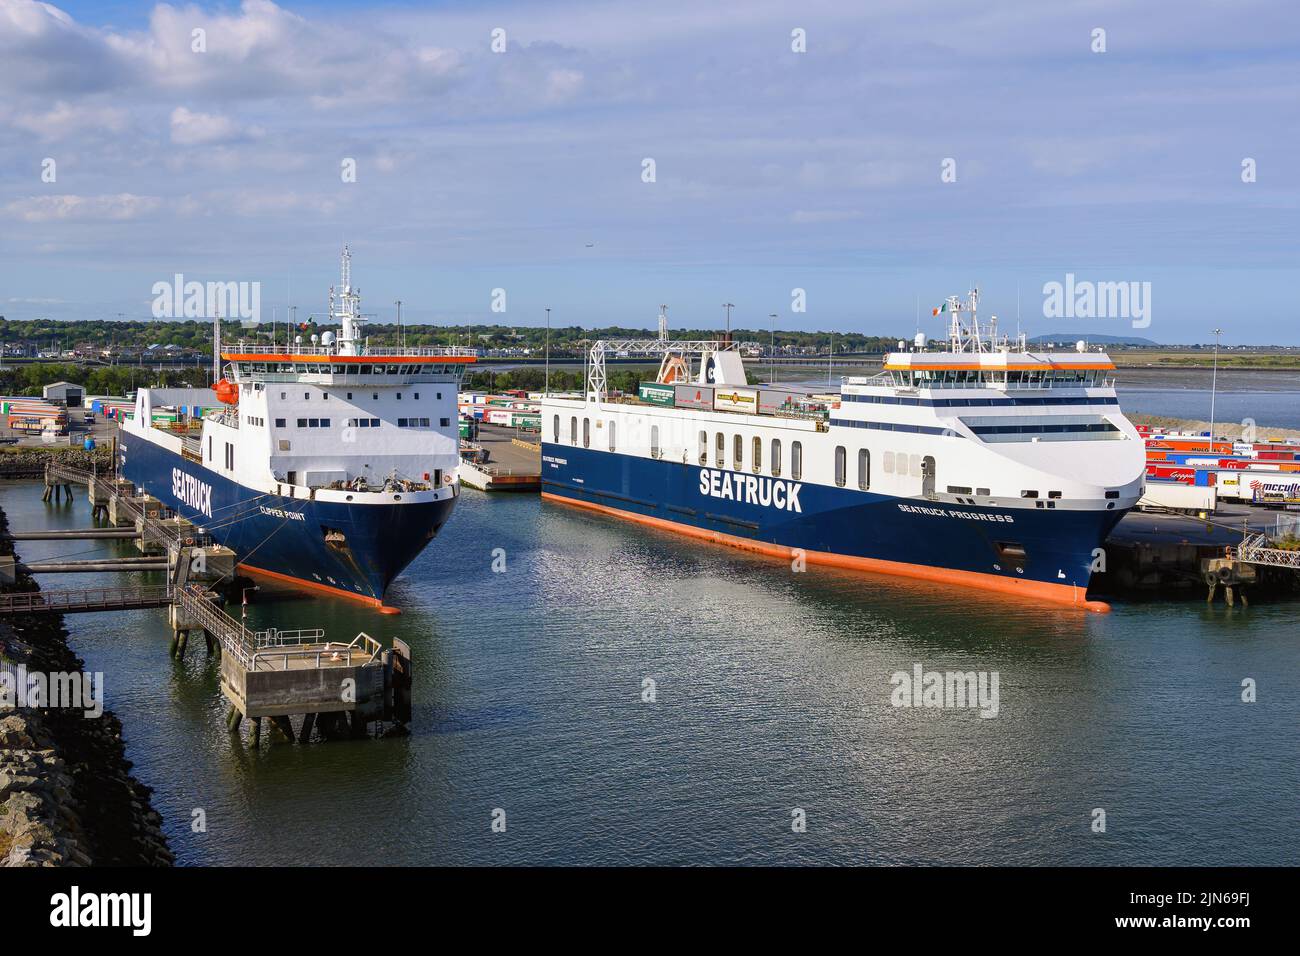 Seatruck Ro-Ro ferries at the Seatruck berths in the port of Dublin - May 2022. Stock Photo